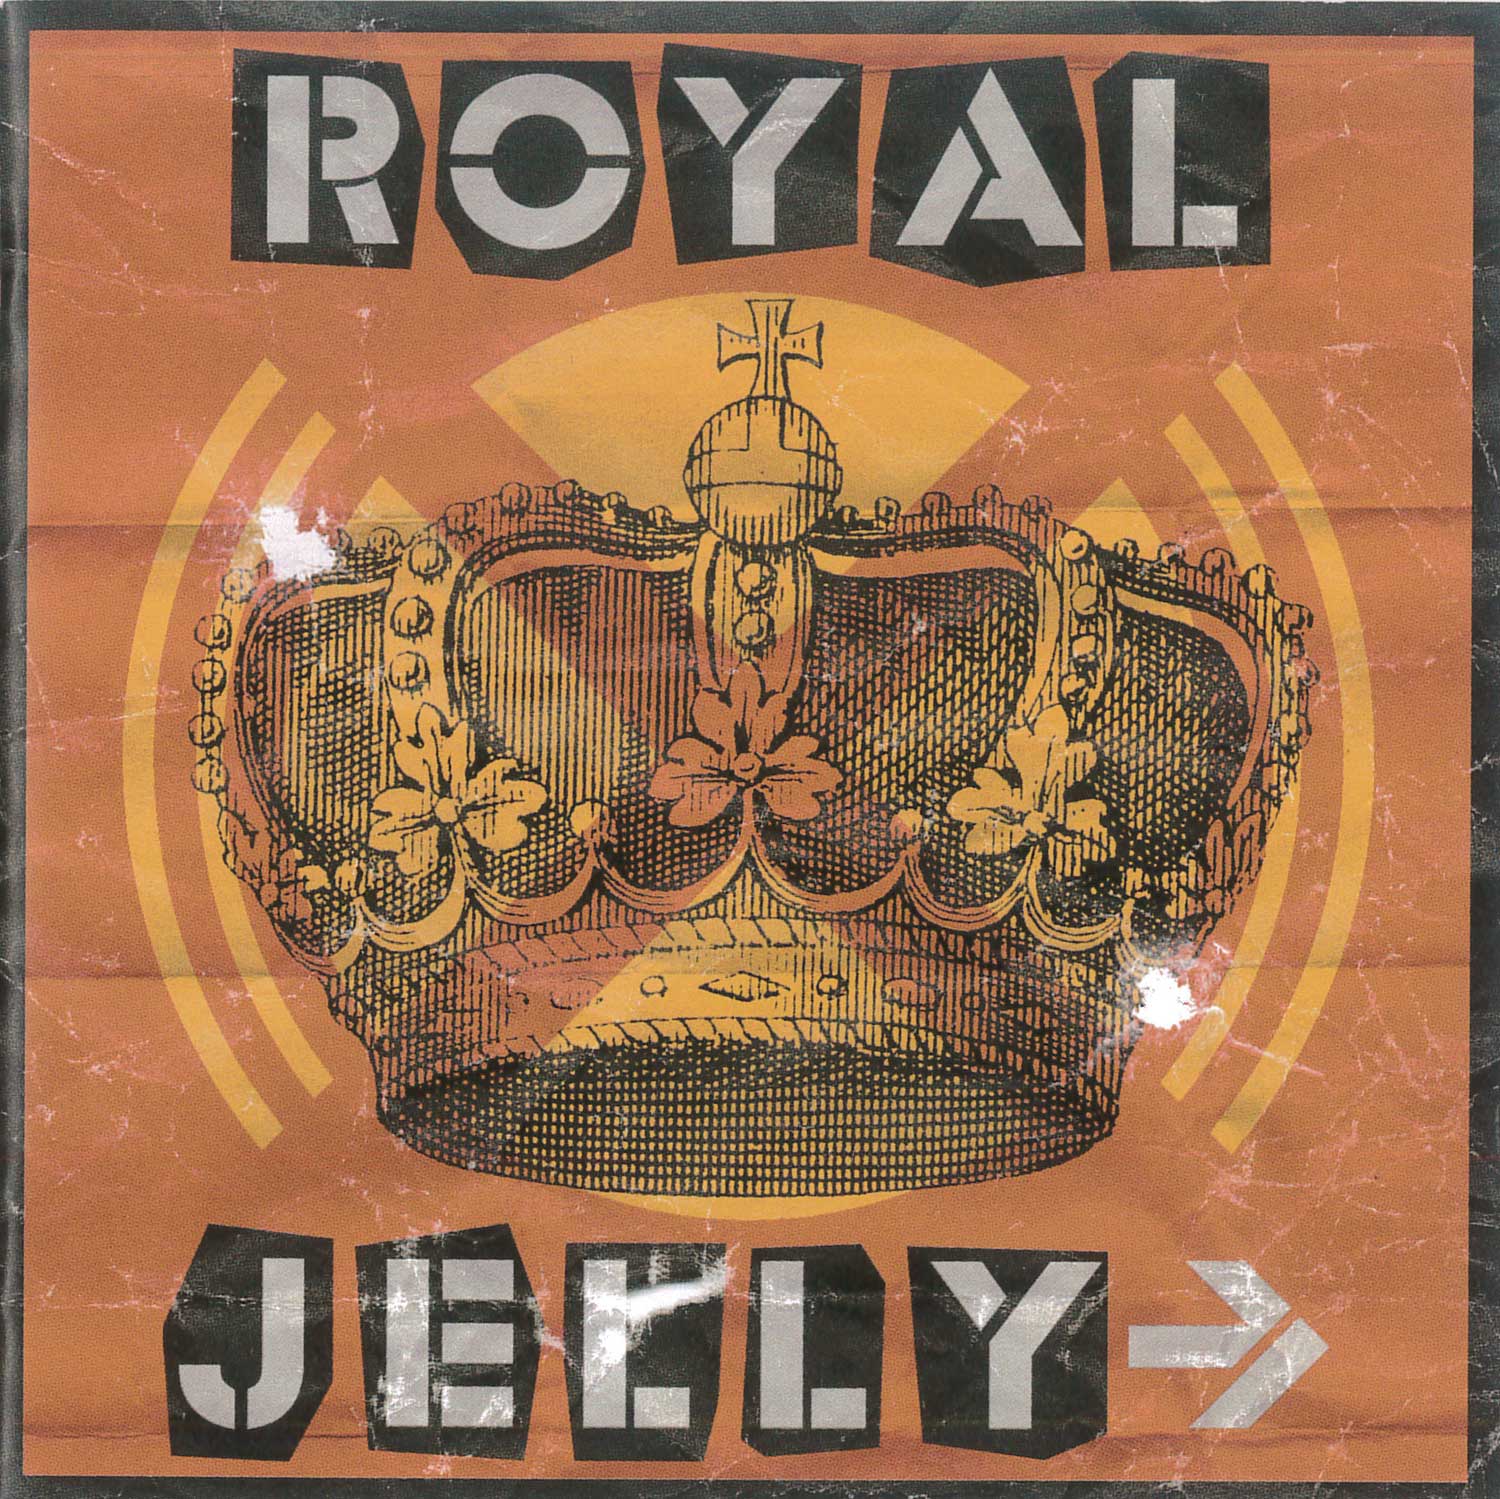 ROYAL JELLY→ - ゼリ→ OFFICIAL WEB SITE